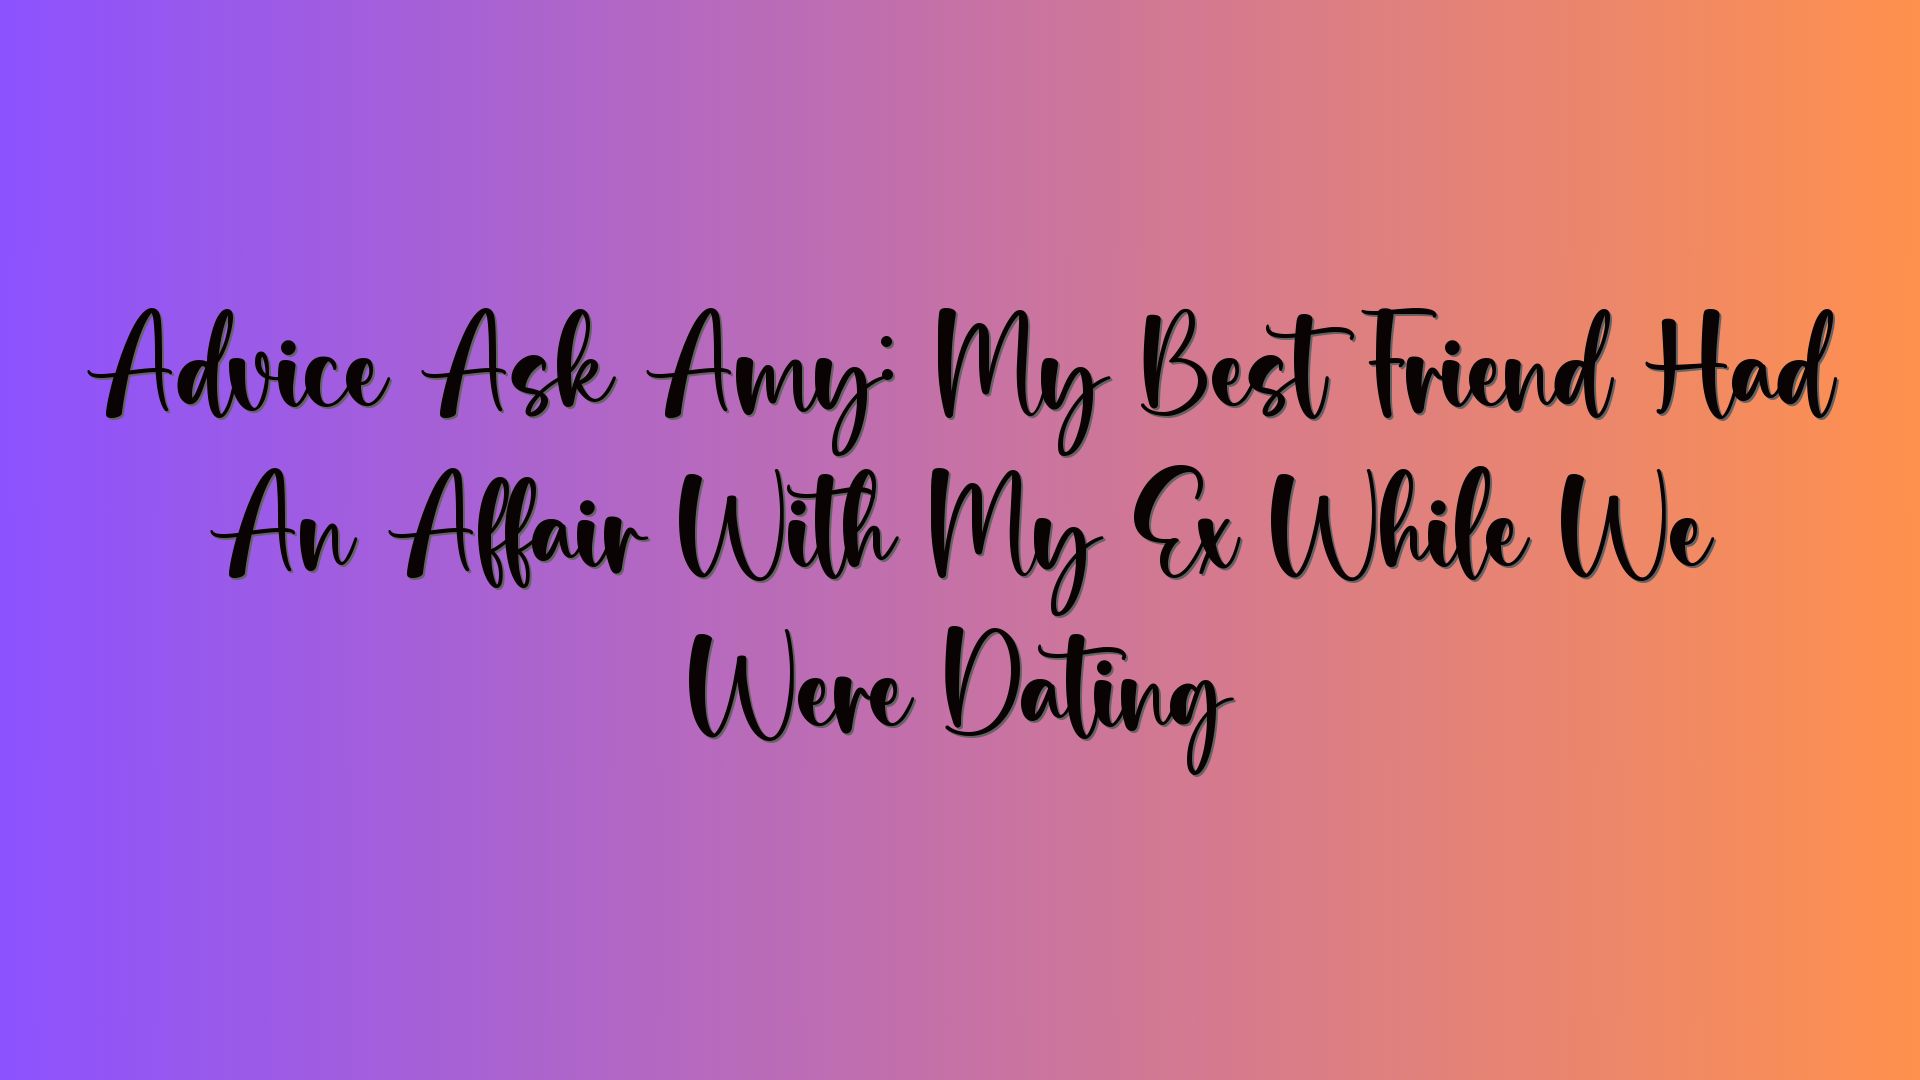 Advice Ask Amy: My Best Friend Had An Affair With My Ex While We Were Dating